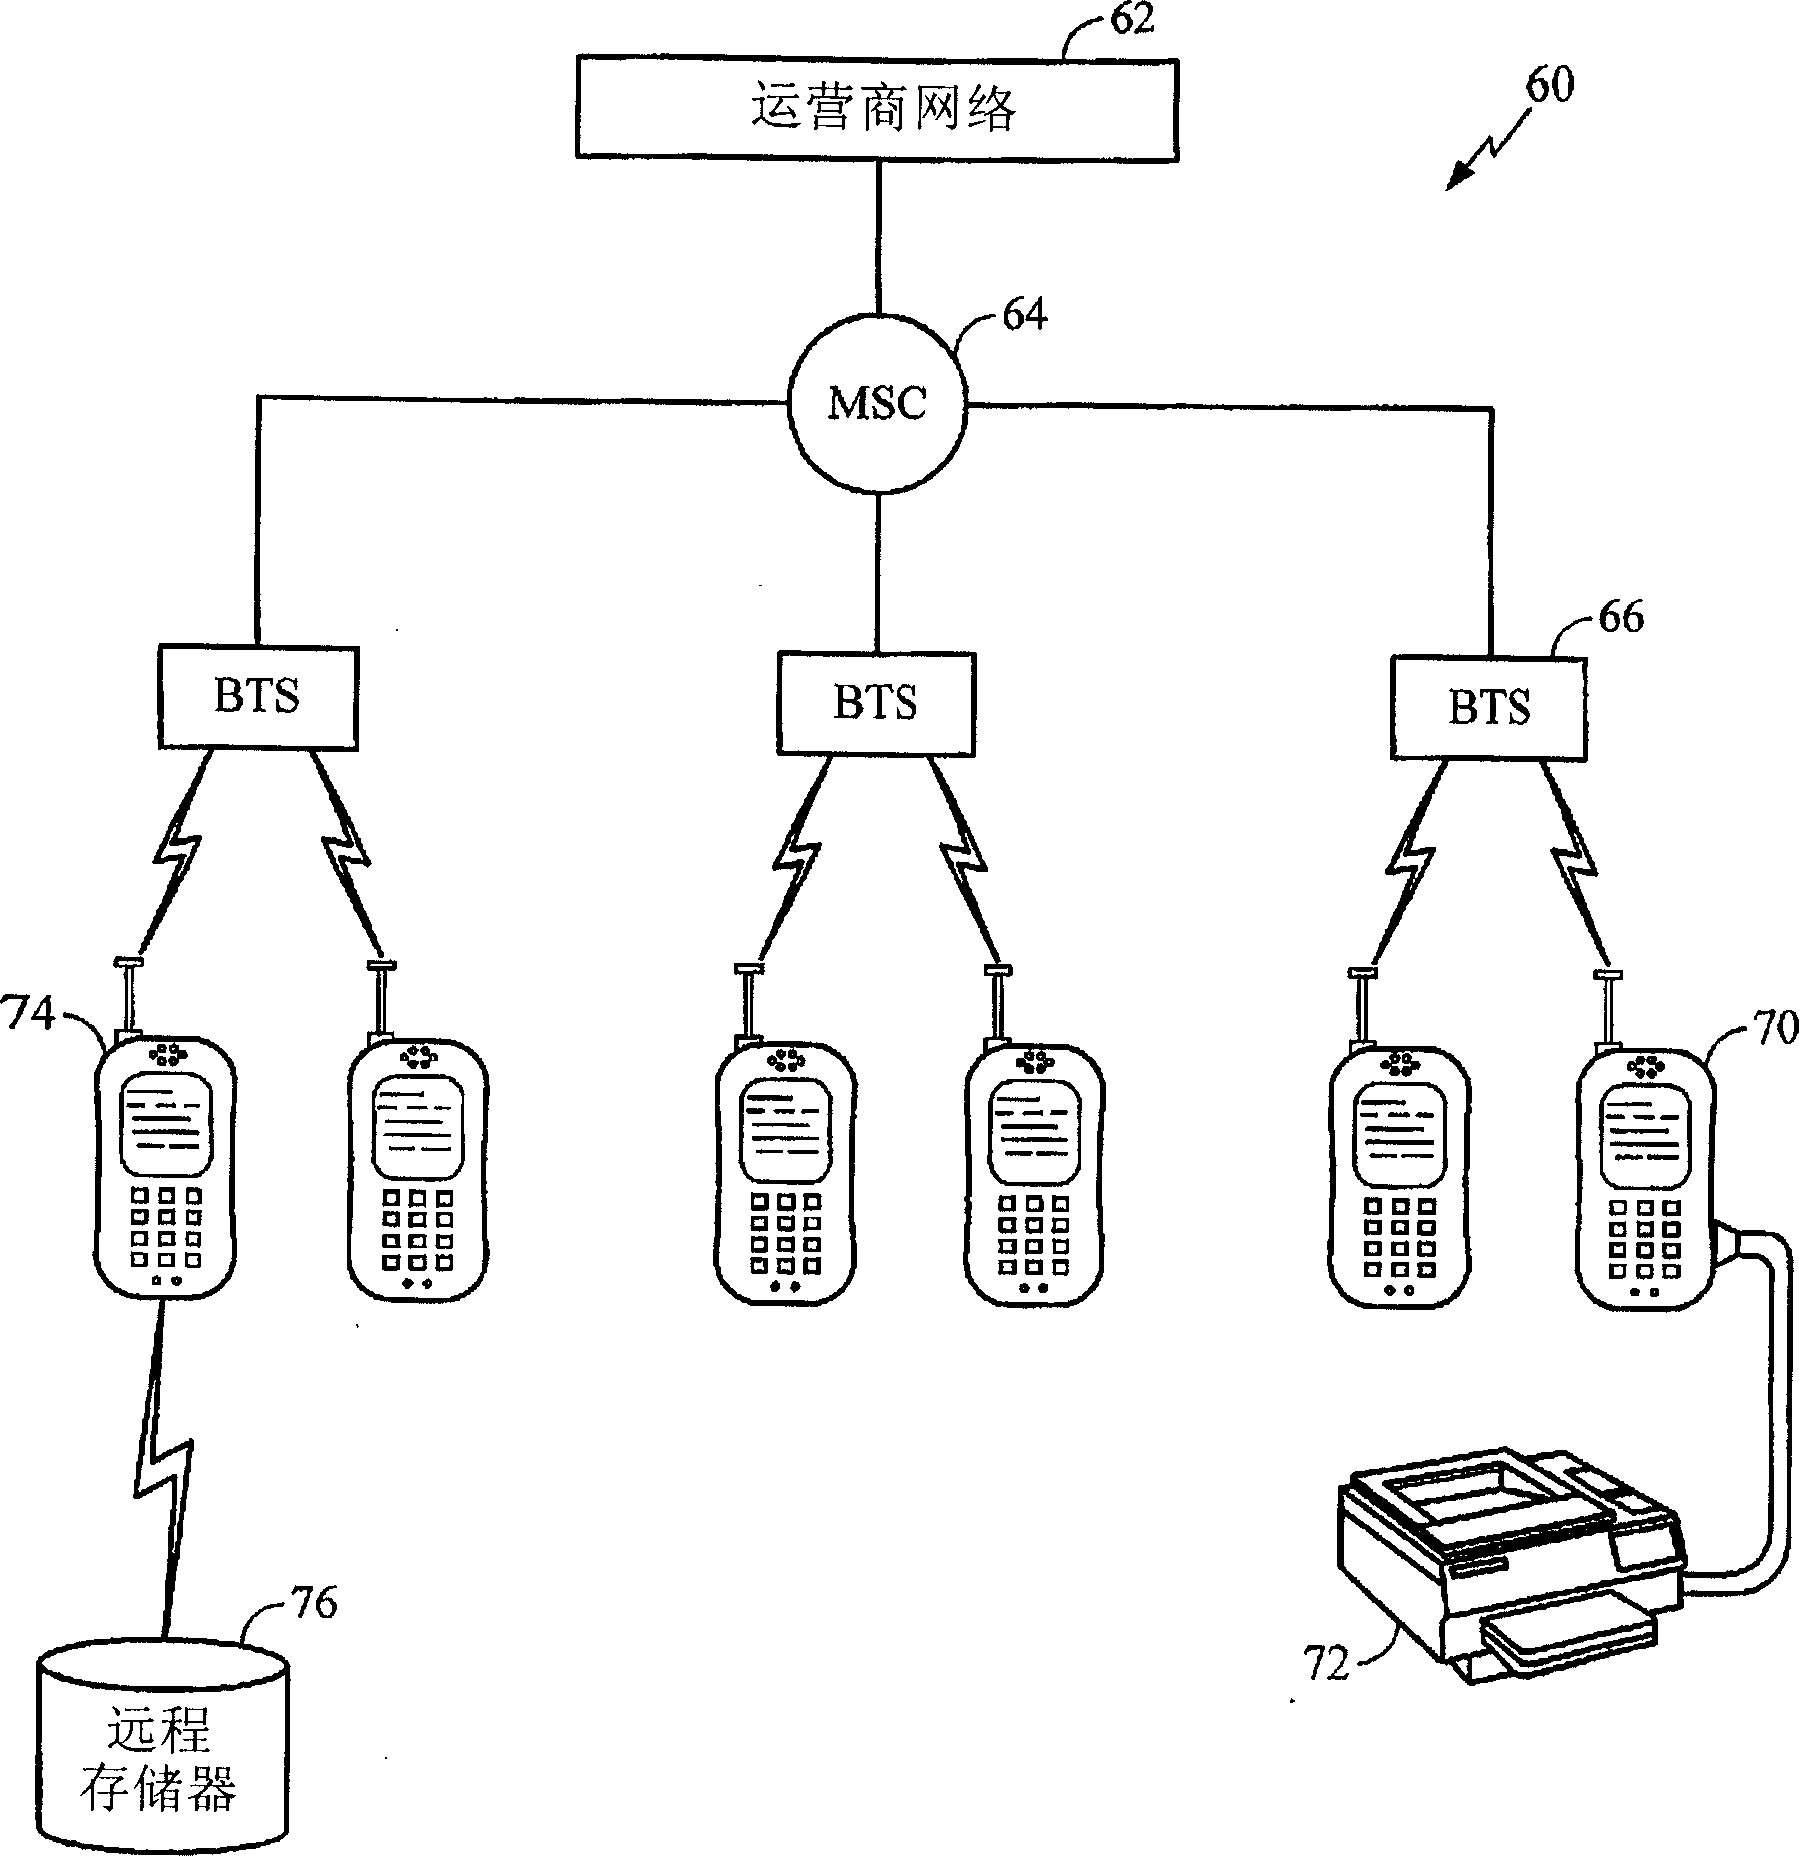 System and method for establishing a communication between a peripheral device and a wireless device